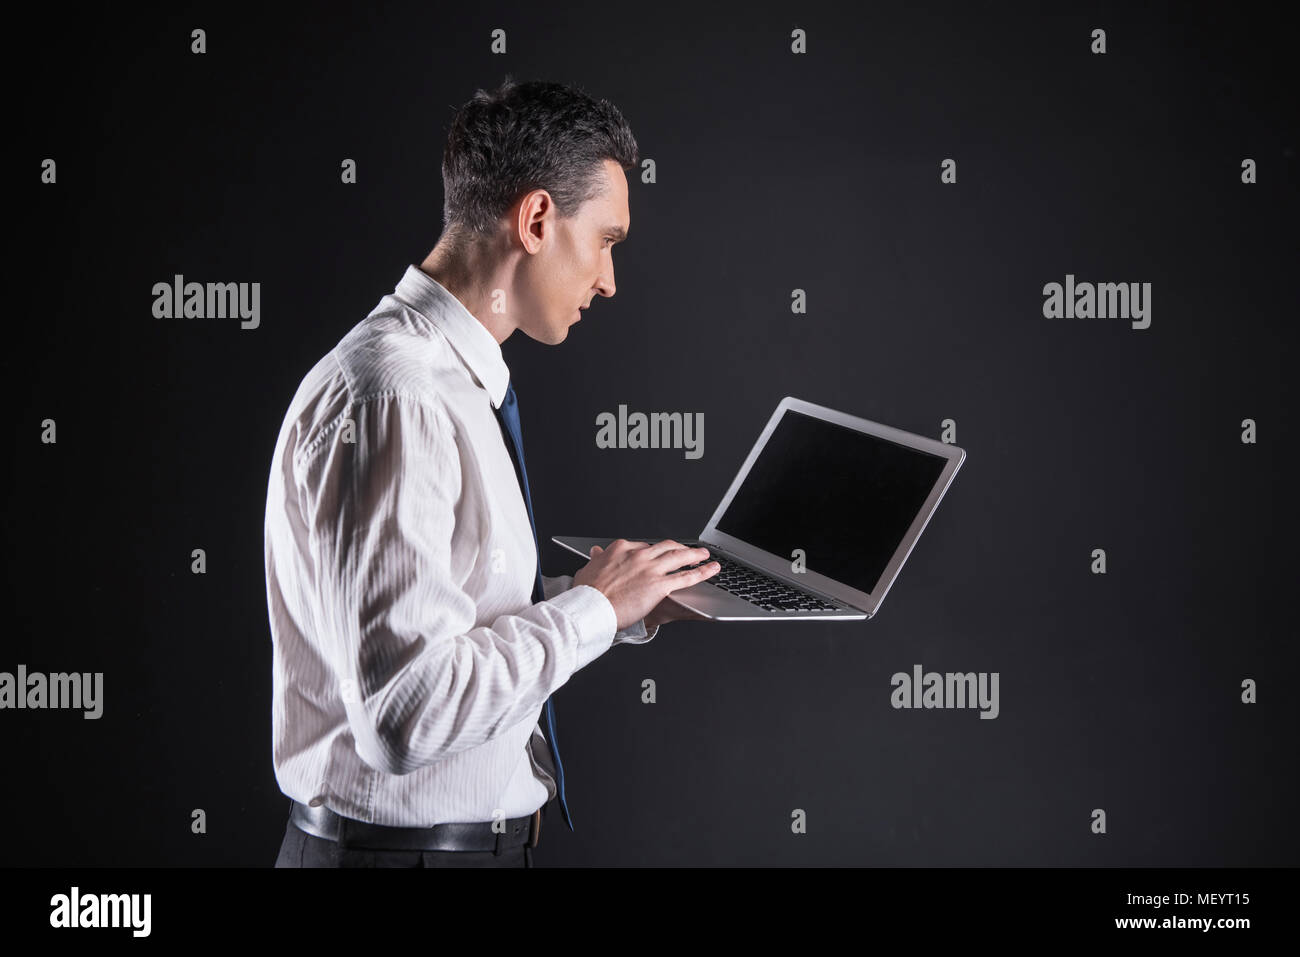 Serious adult man using his device Stock Photo